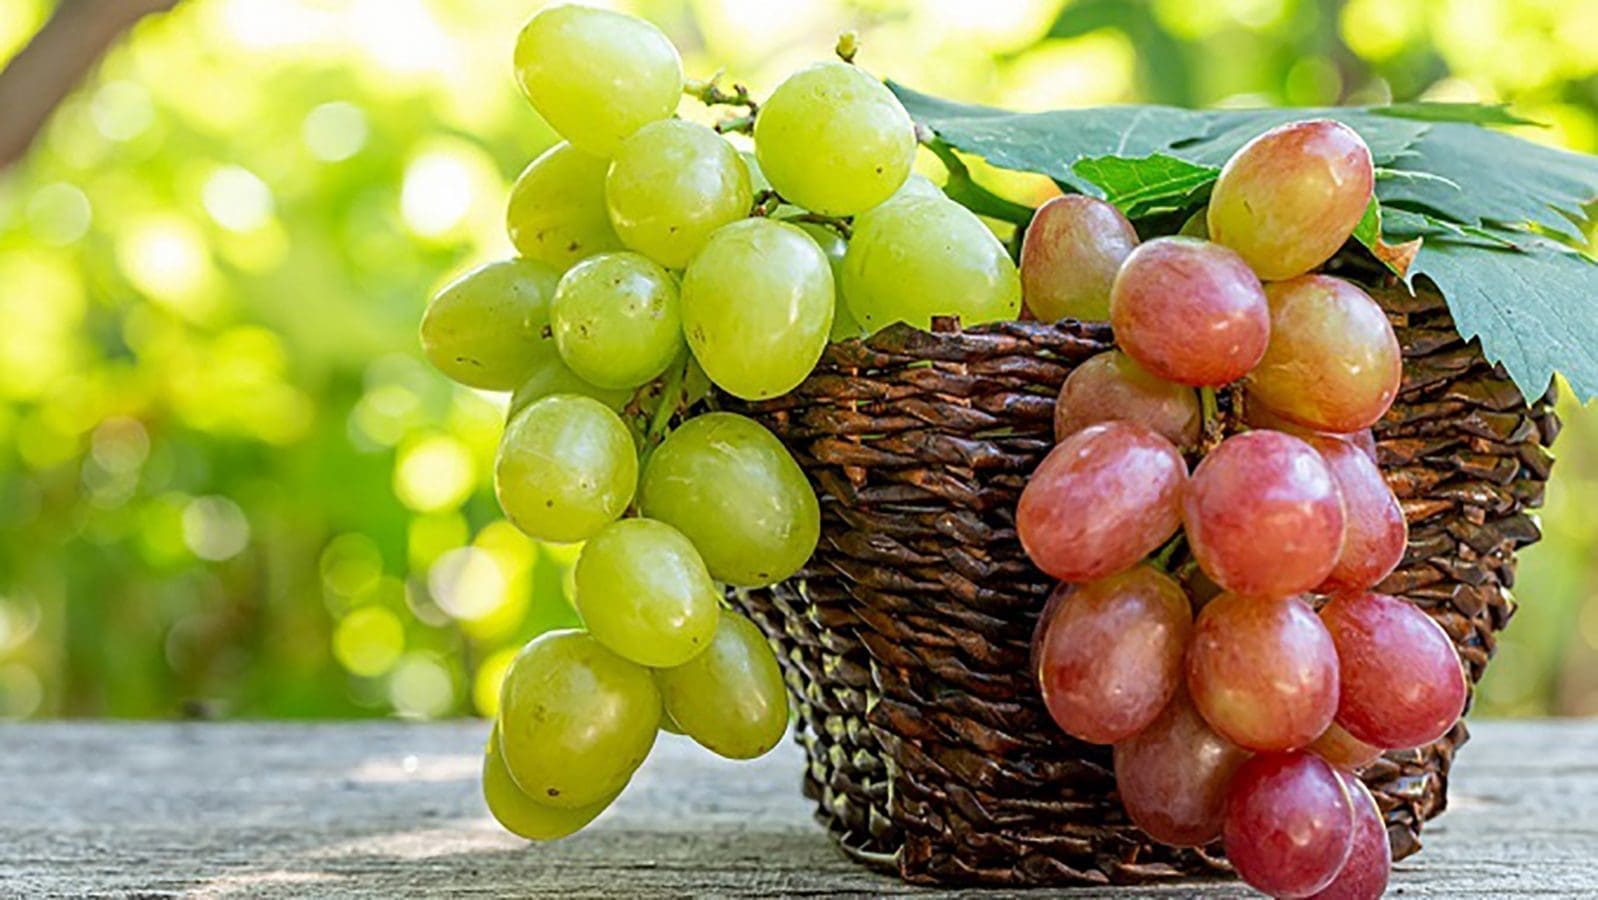 Egypt’s table grapes production expected to rebound following favourable weather conditions